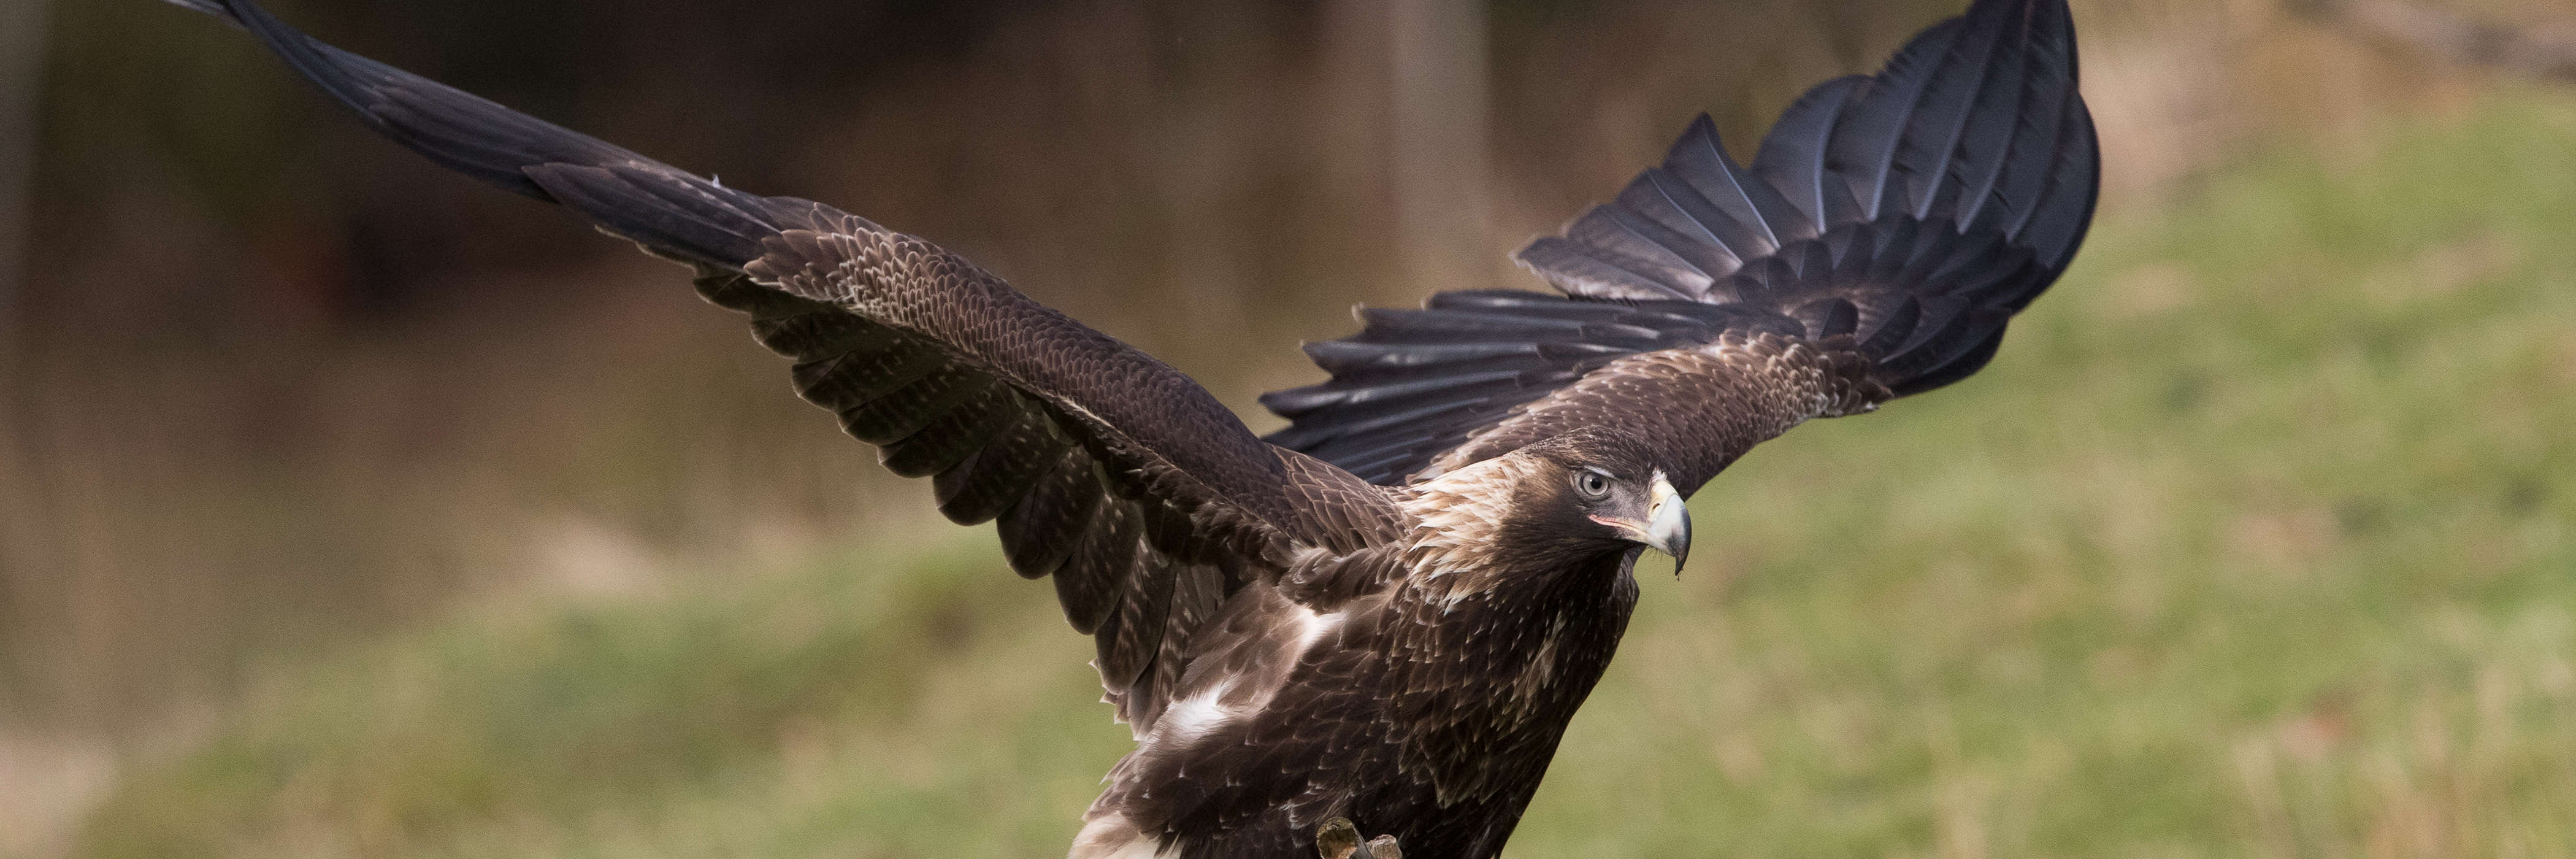 Close-up of a wedge-tailed eagle landing on a dead branch in a field, with forest out of focus behind. Its wings are still outstretched and its front talons are on the branch. The pale feathers on the nape of its neck indicate that it is a young bird. Photo: Alfred Schulte, taken at Inala on Bruny Island.